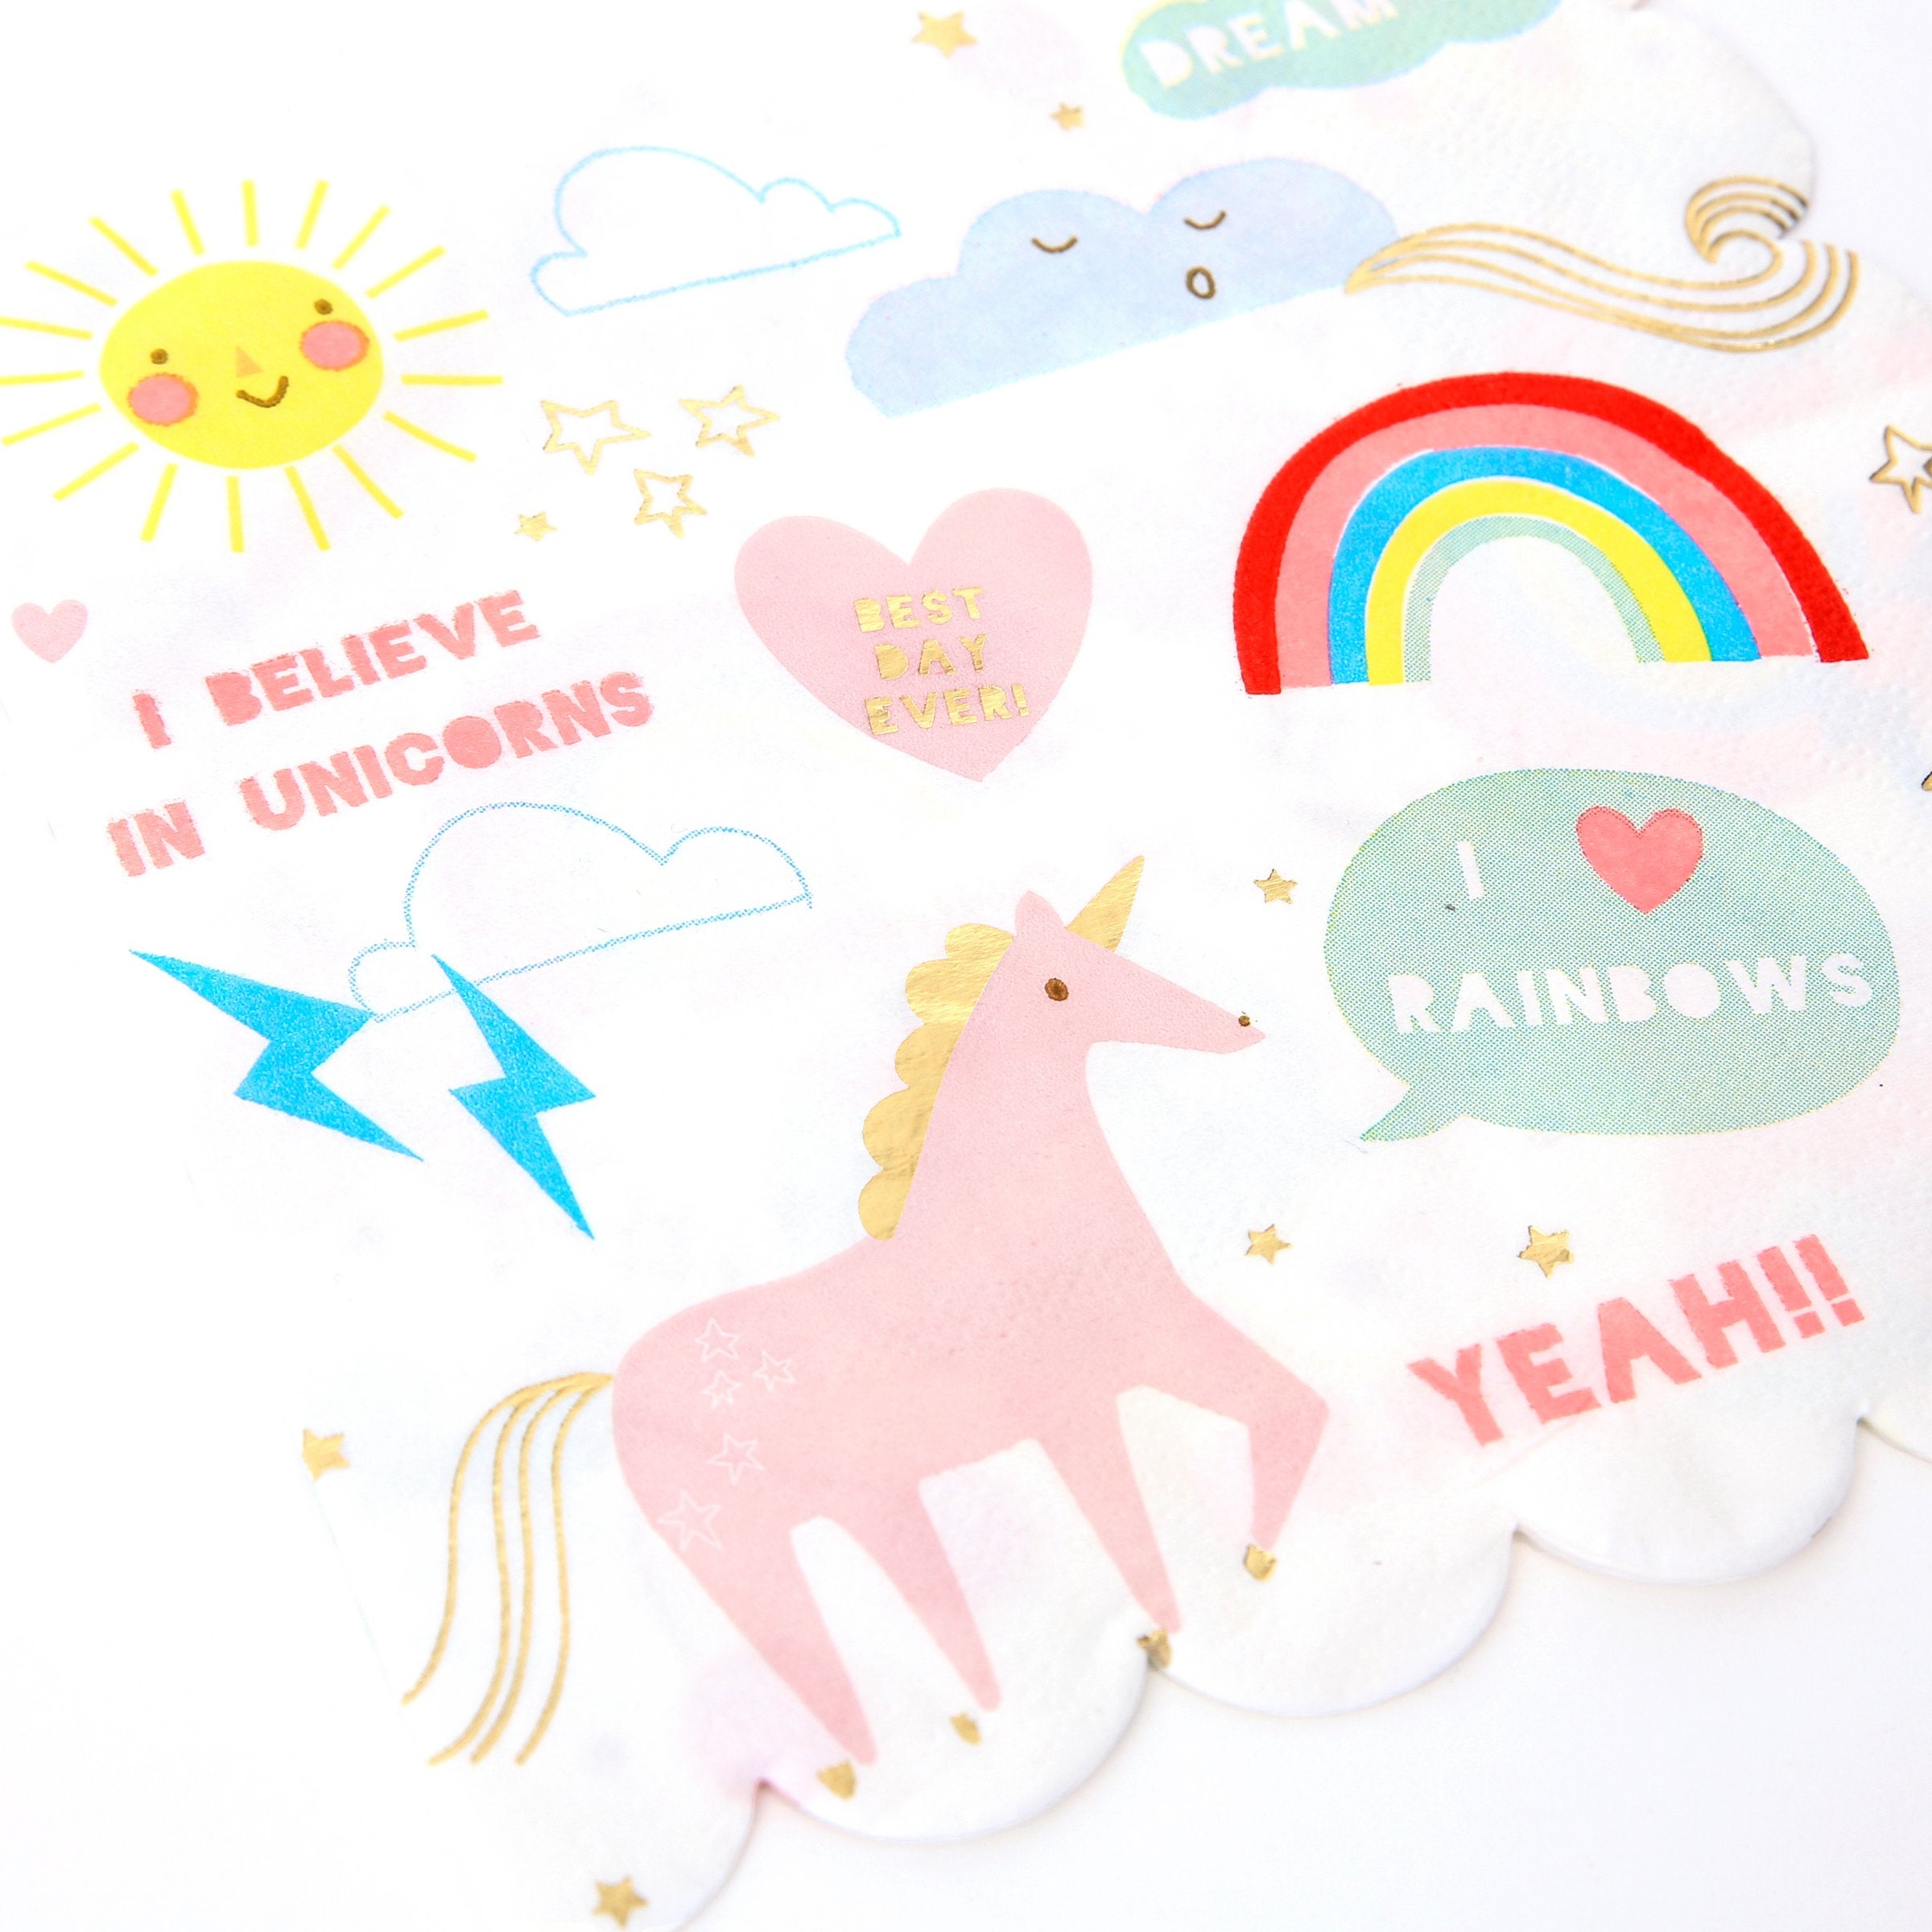 These delightful unicorn party napkins have beautiful illustrations, shiny gold foil detail and a stylish scallop edge.